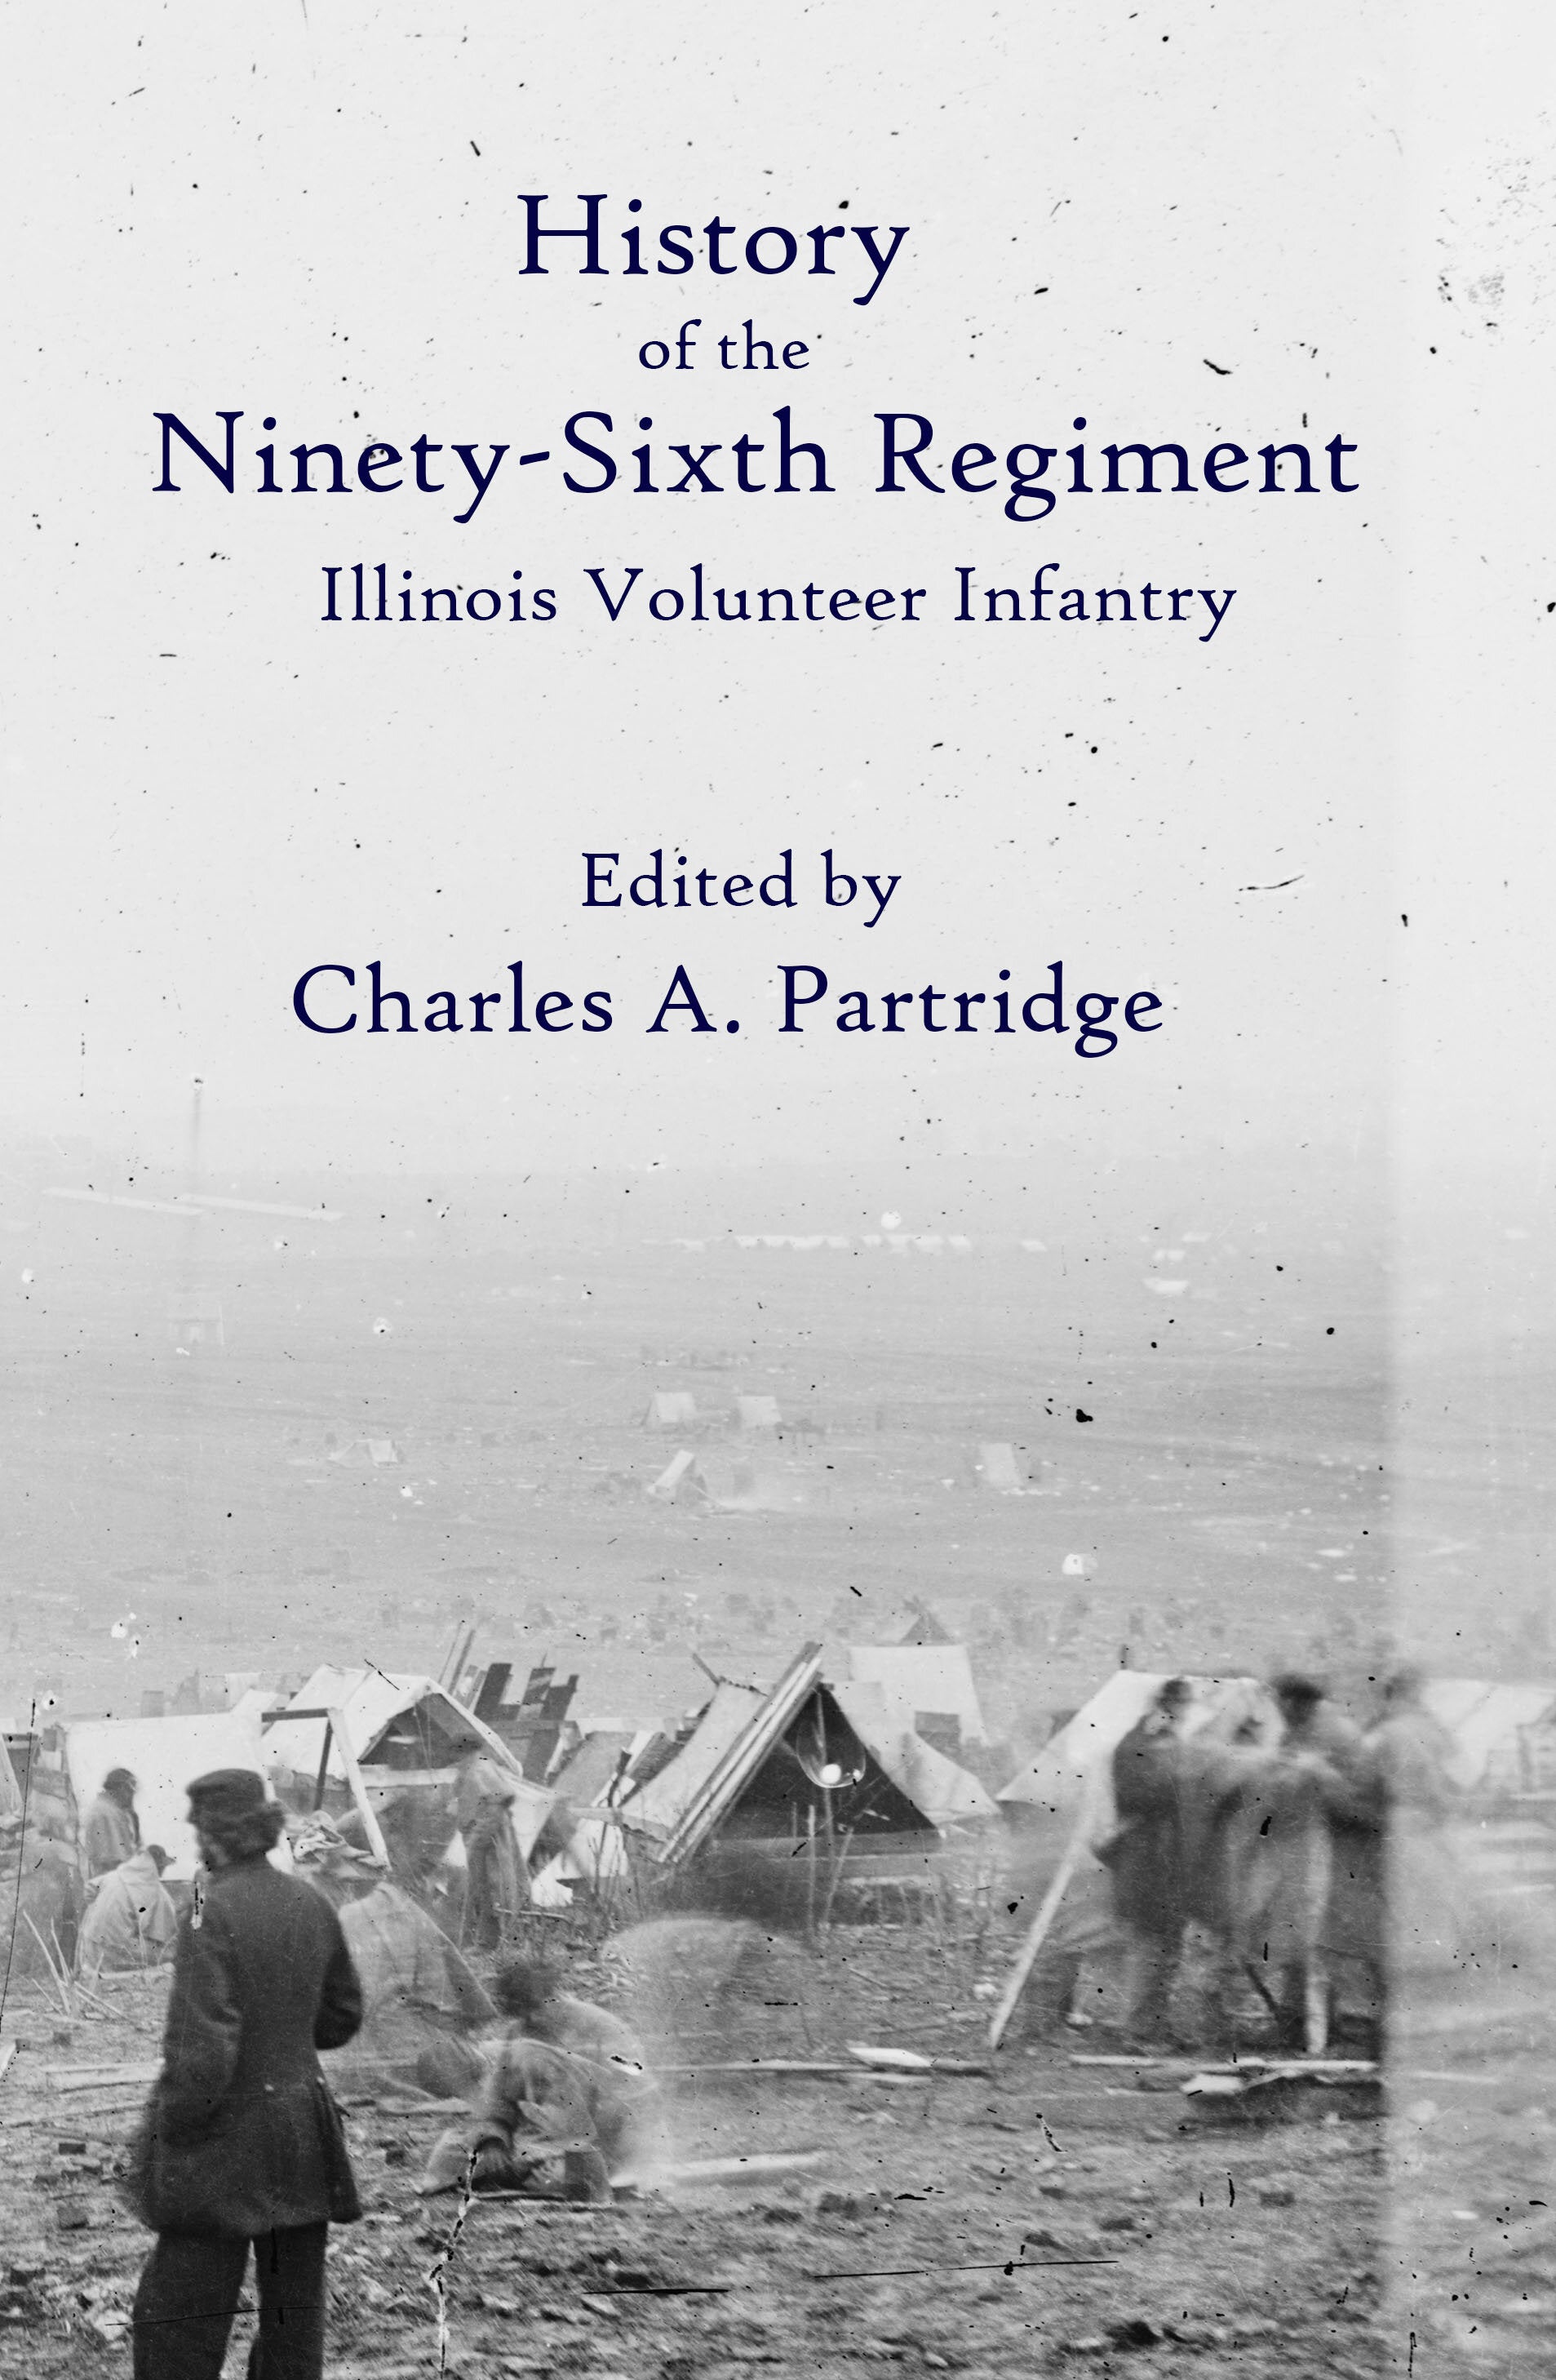 History of 96th Regiment of Illinois